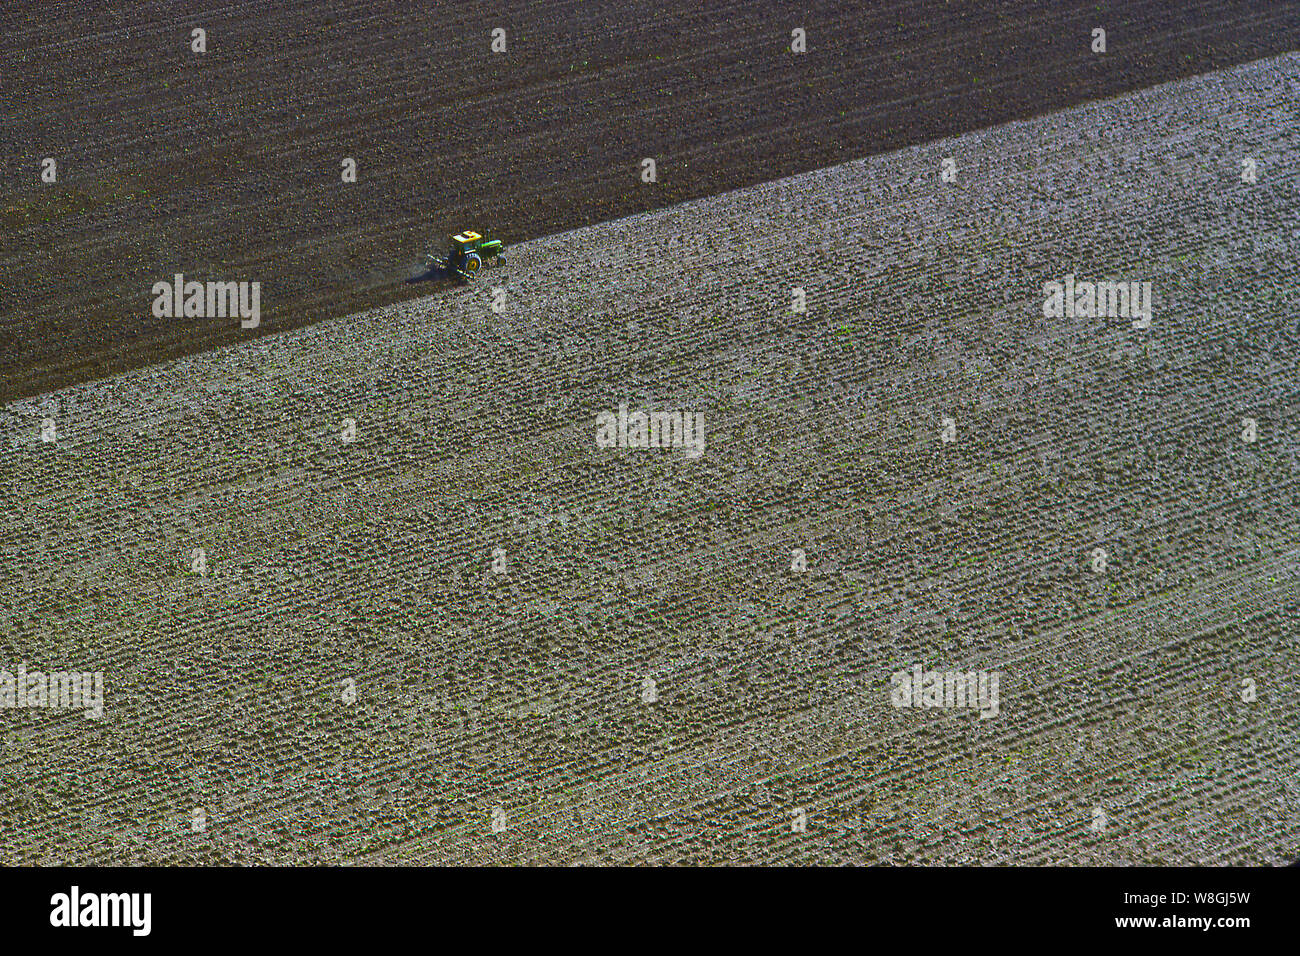 Tractor plowing a field for cotton and vegetable production Stock Photo